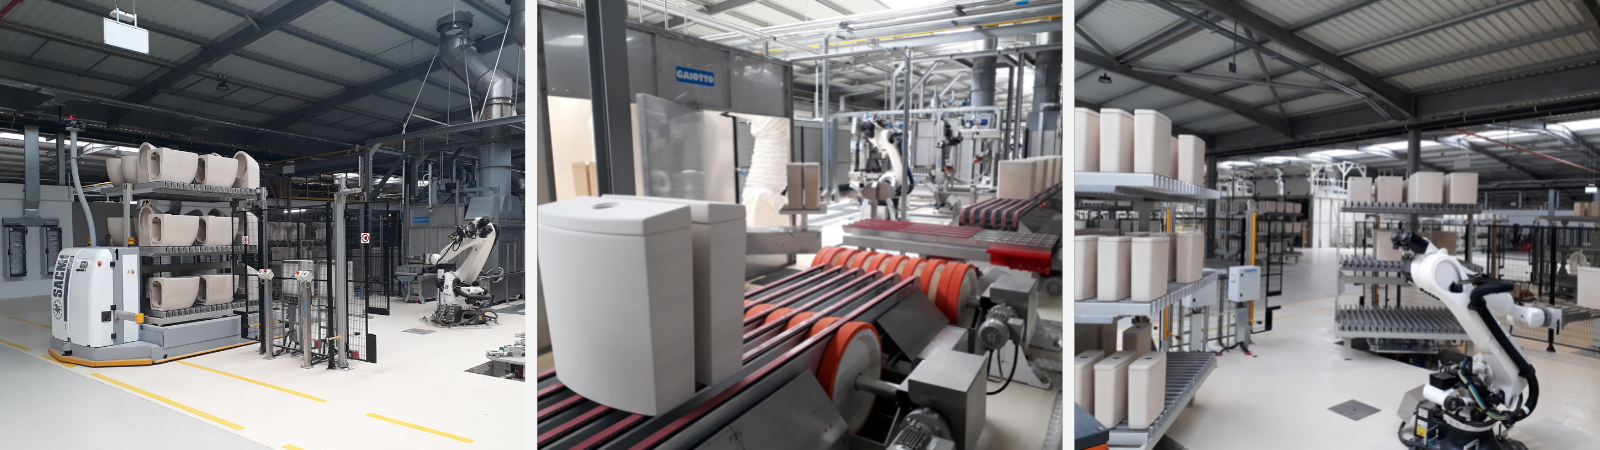 Sanindusa invests in factory digitalization with SACMI’s HERE technology